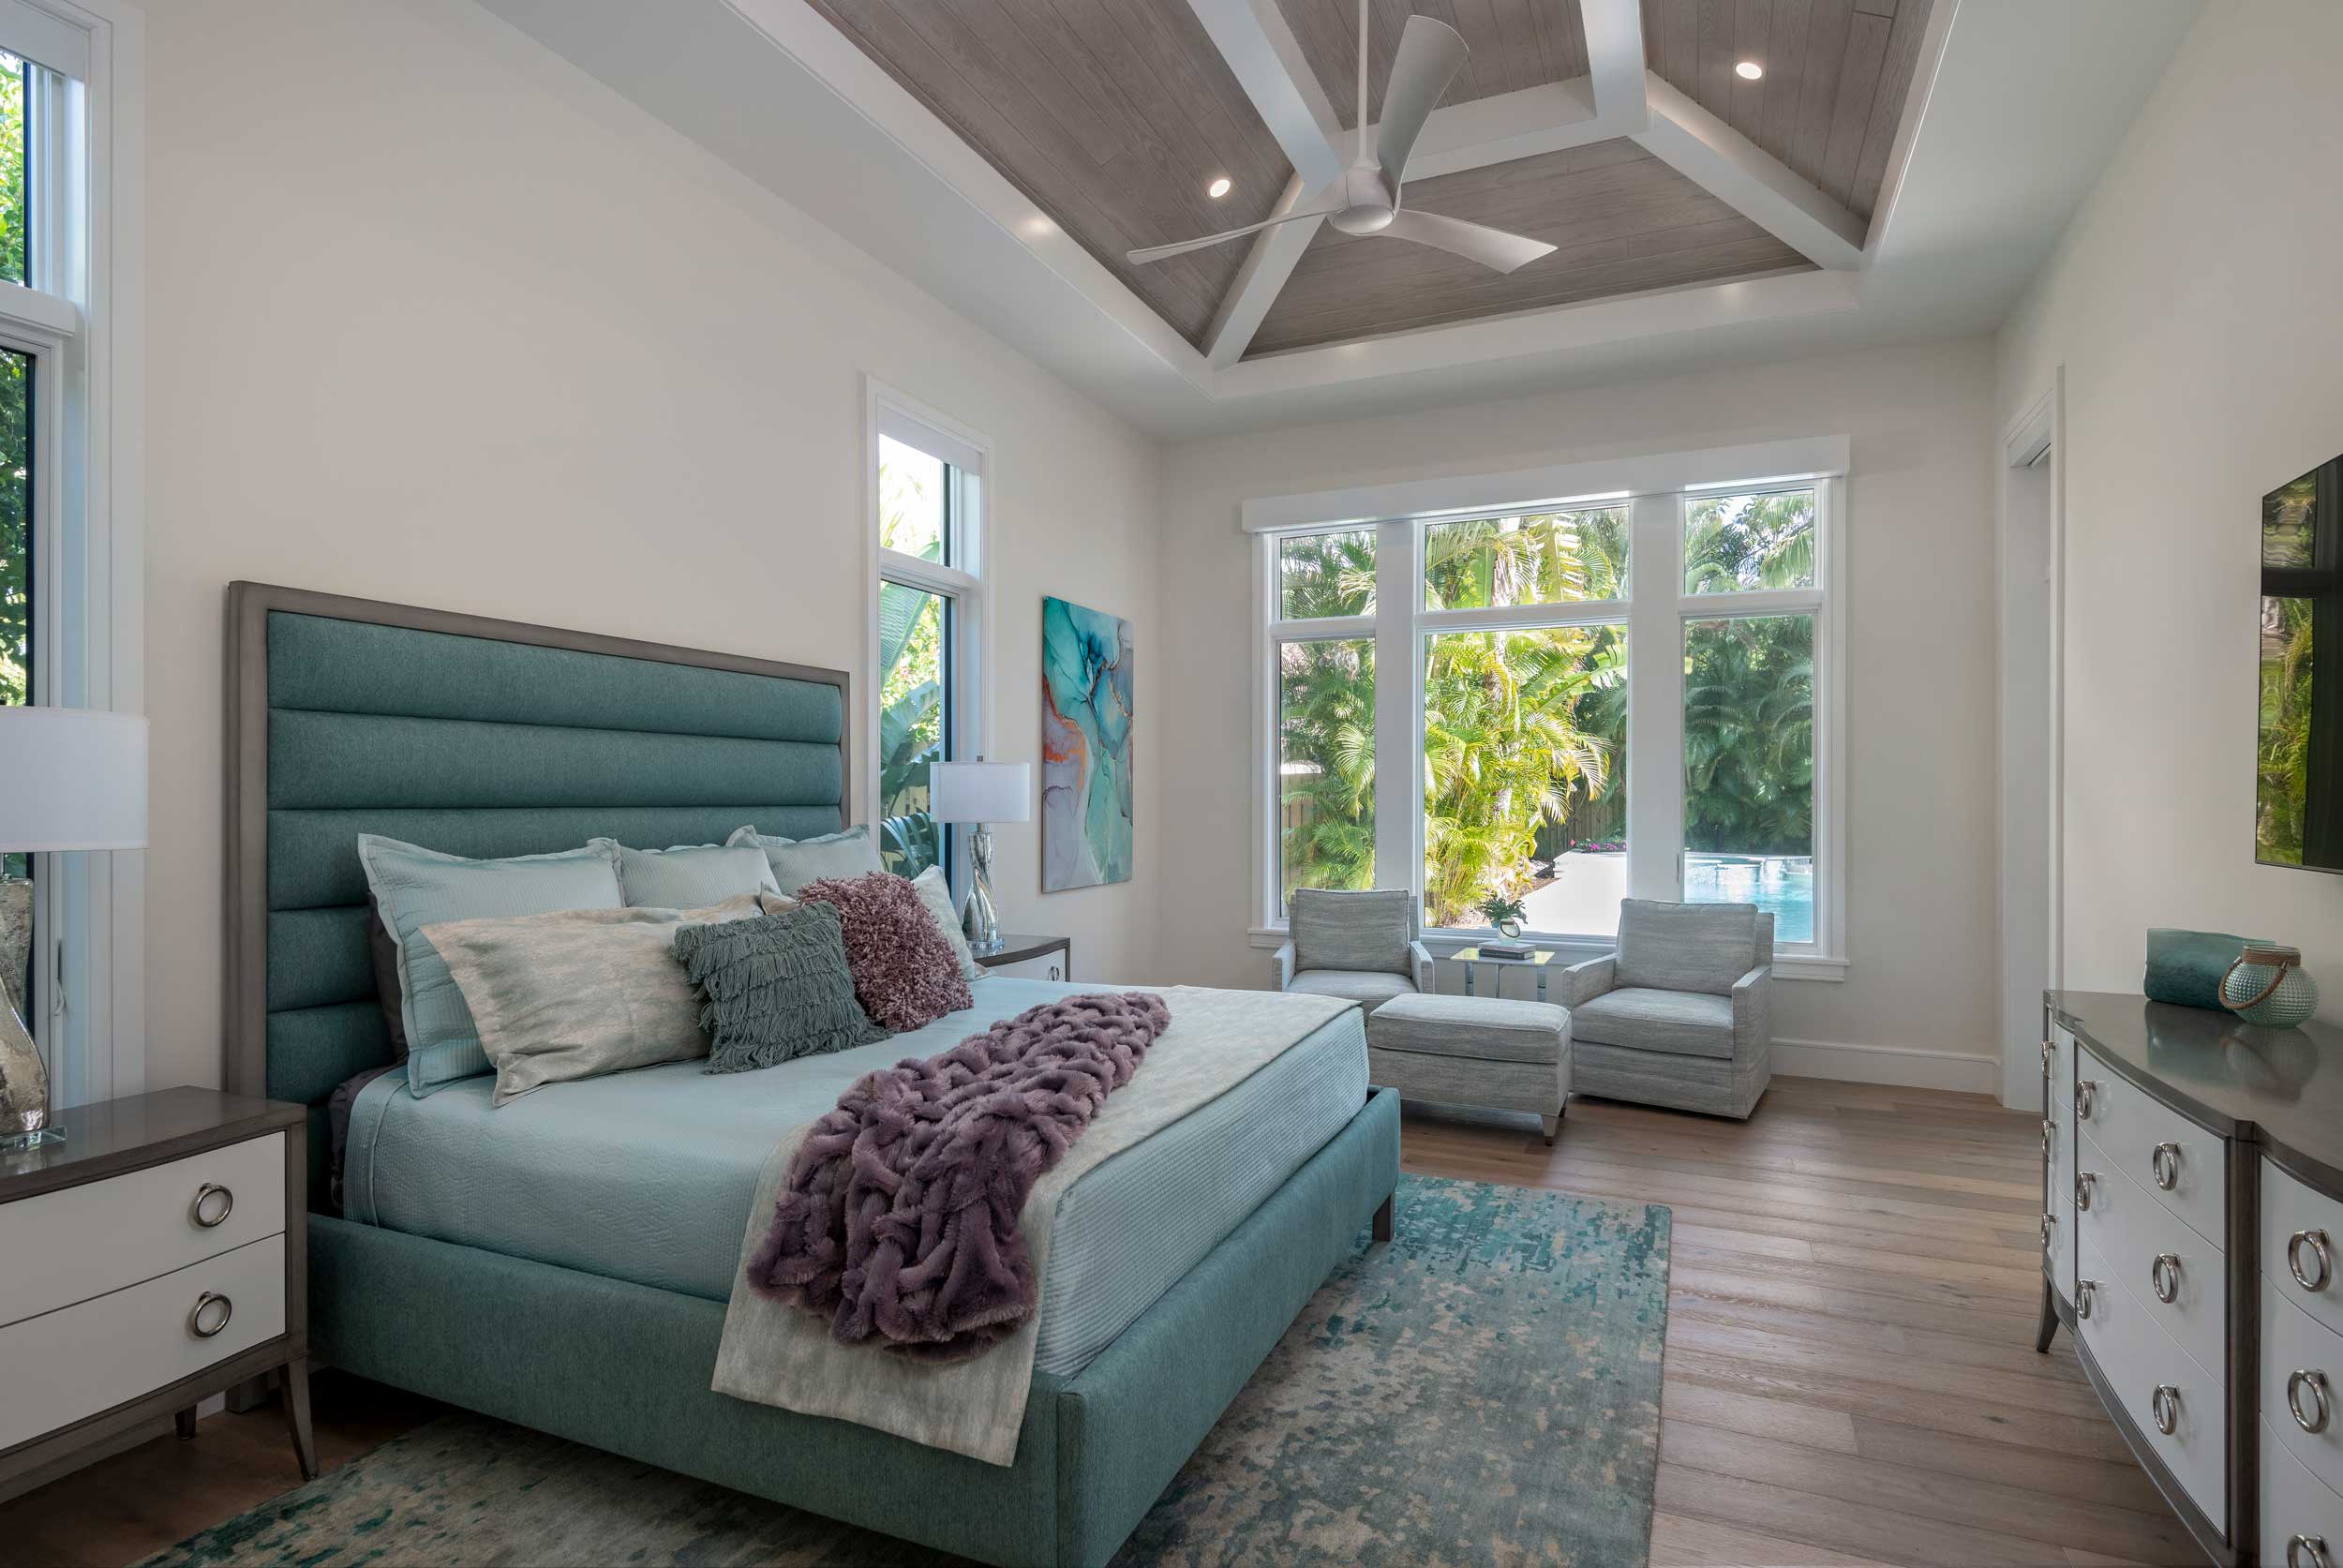 Ceiling Features from Premier Home Finishes